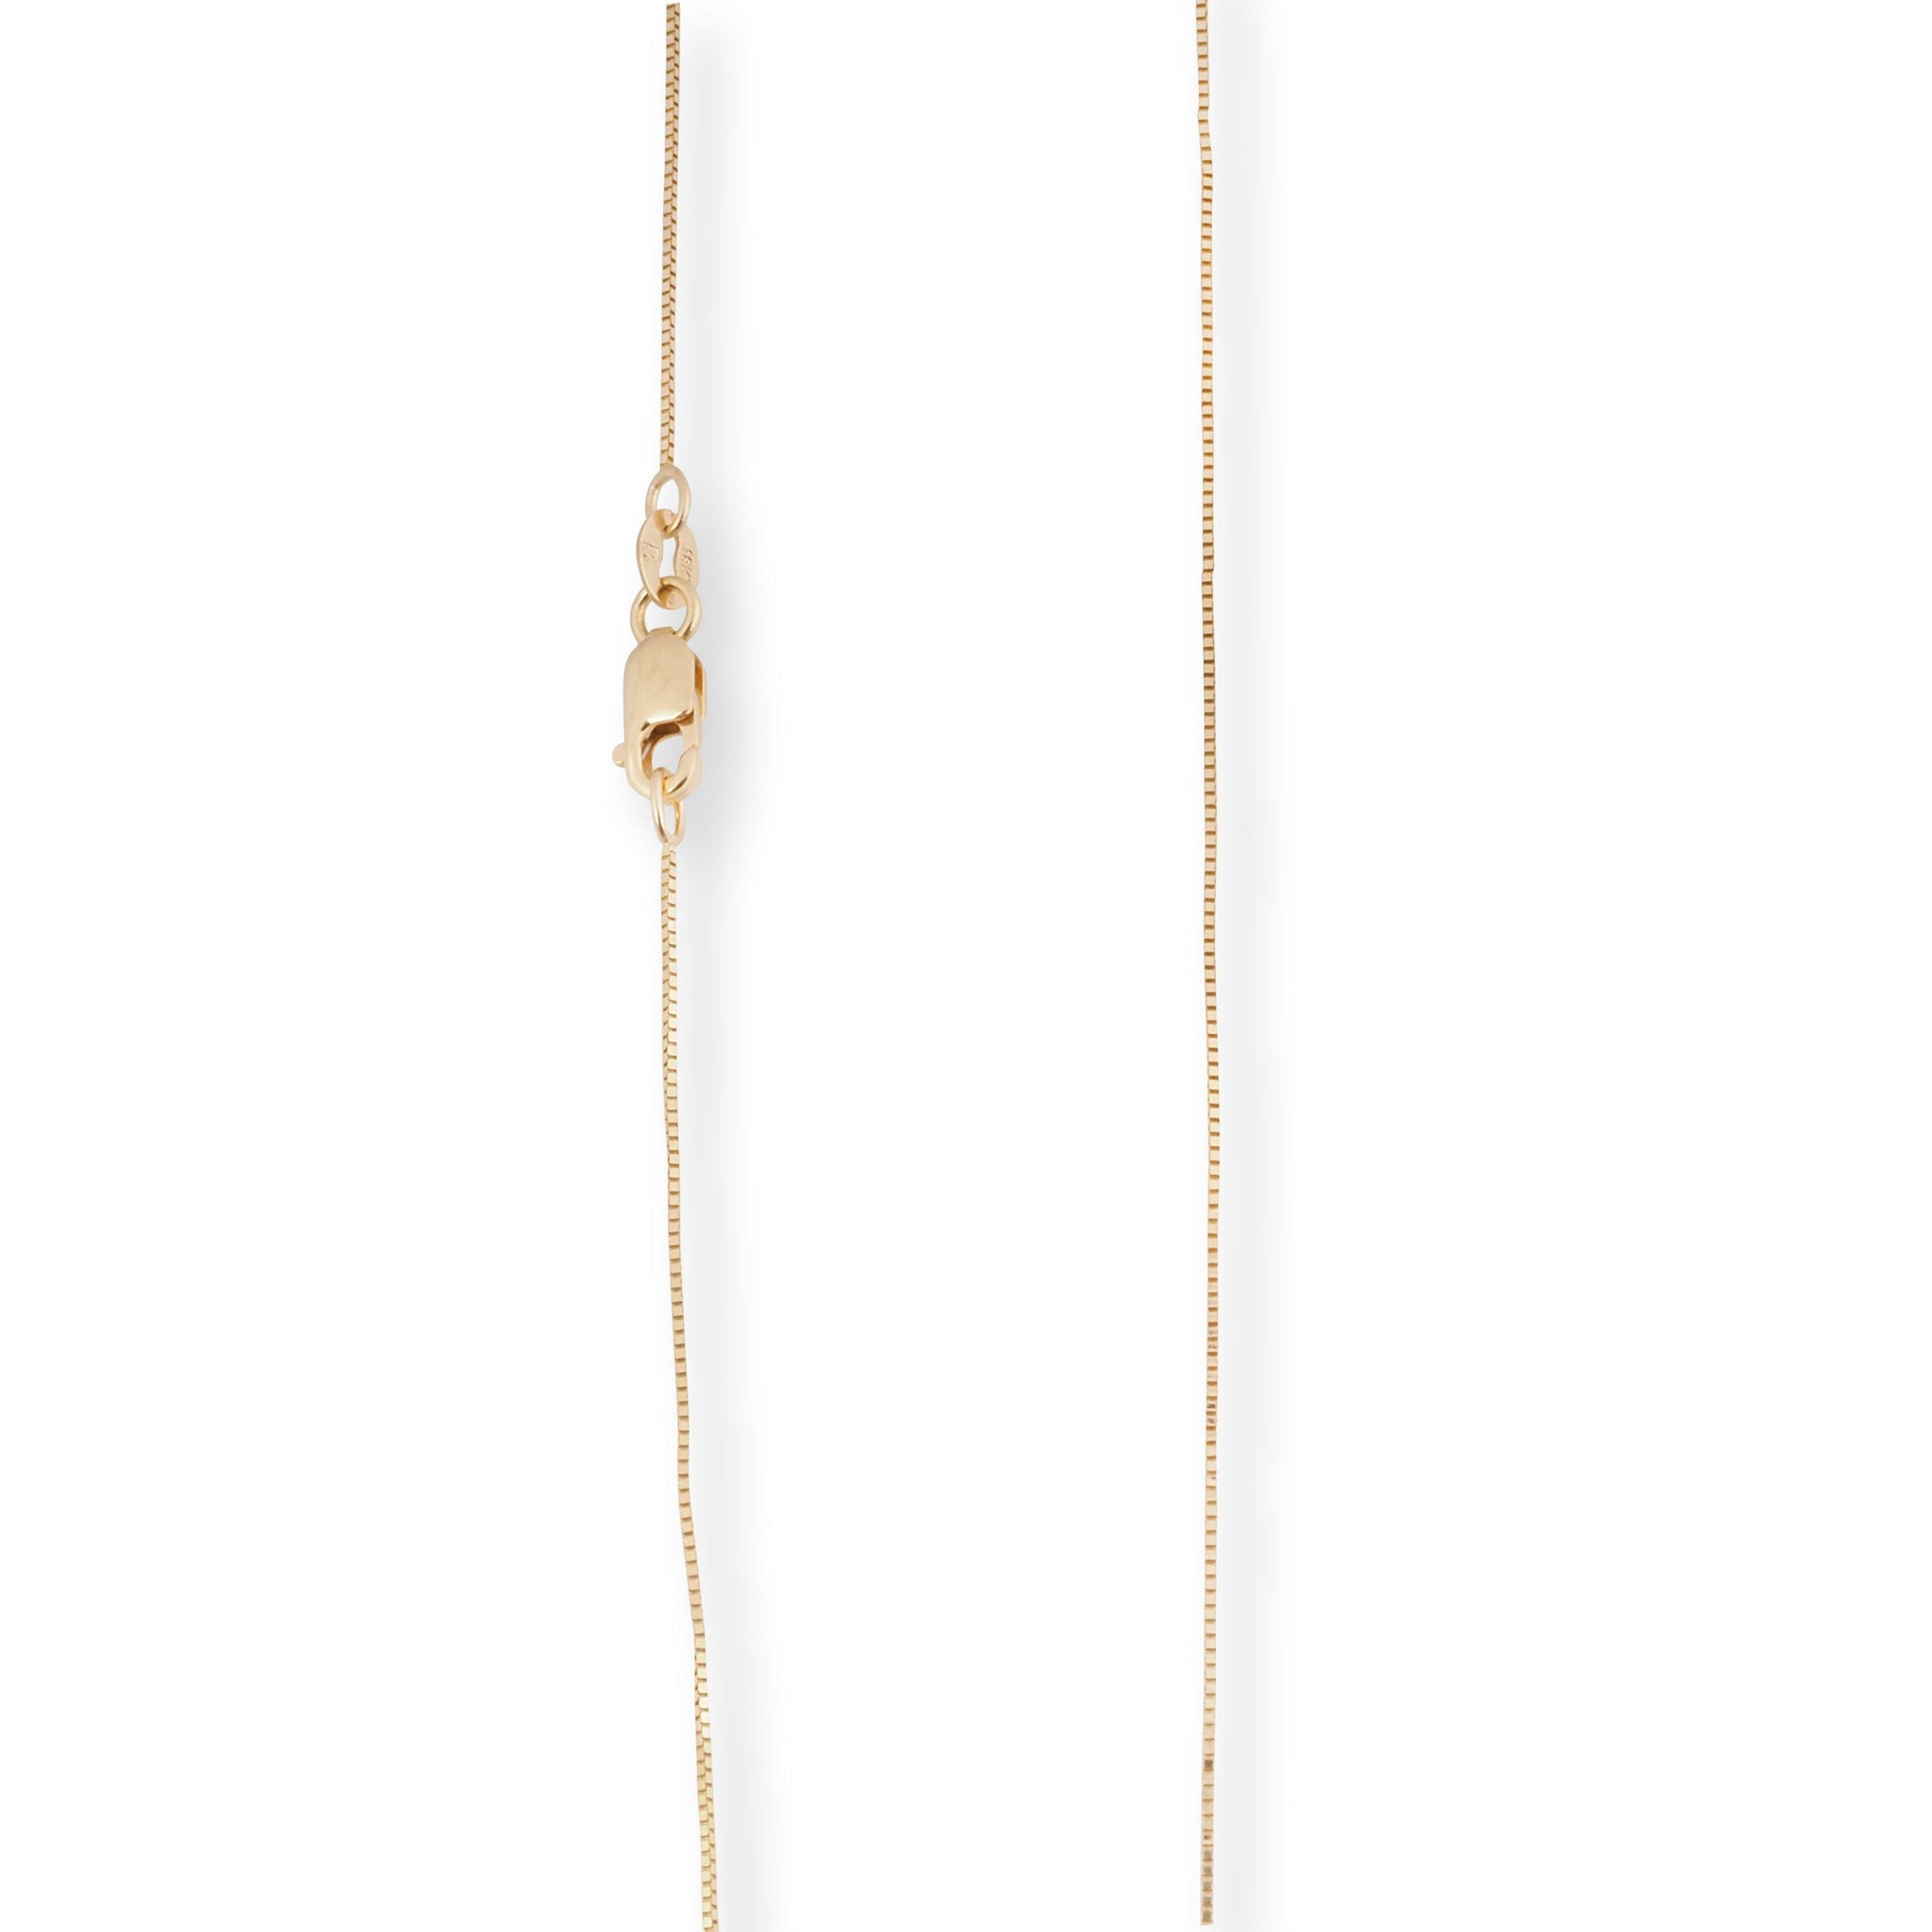 18ct Yellow Gold Box Chain with Lobster Clasp C-3816